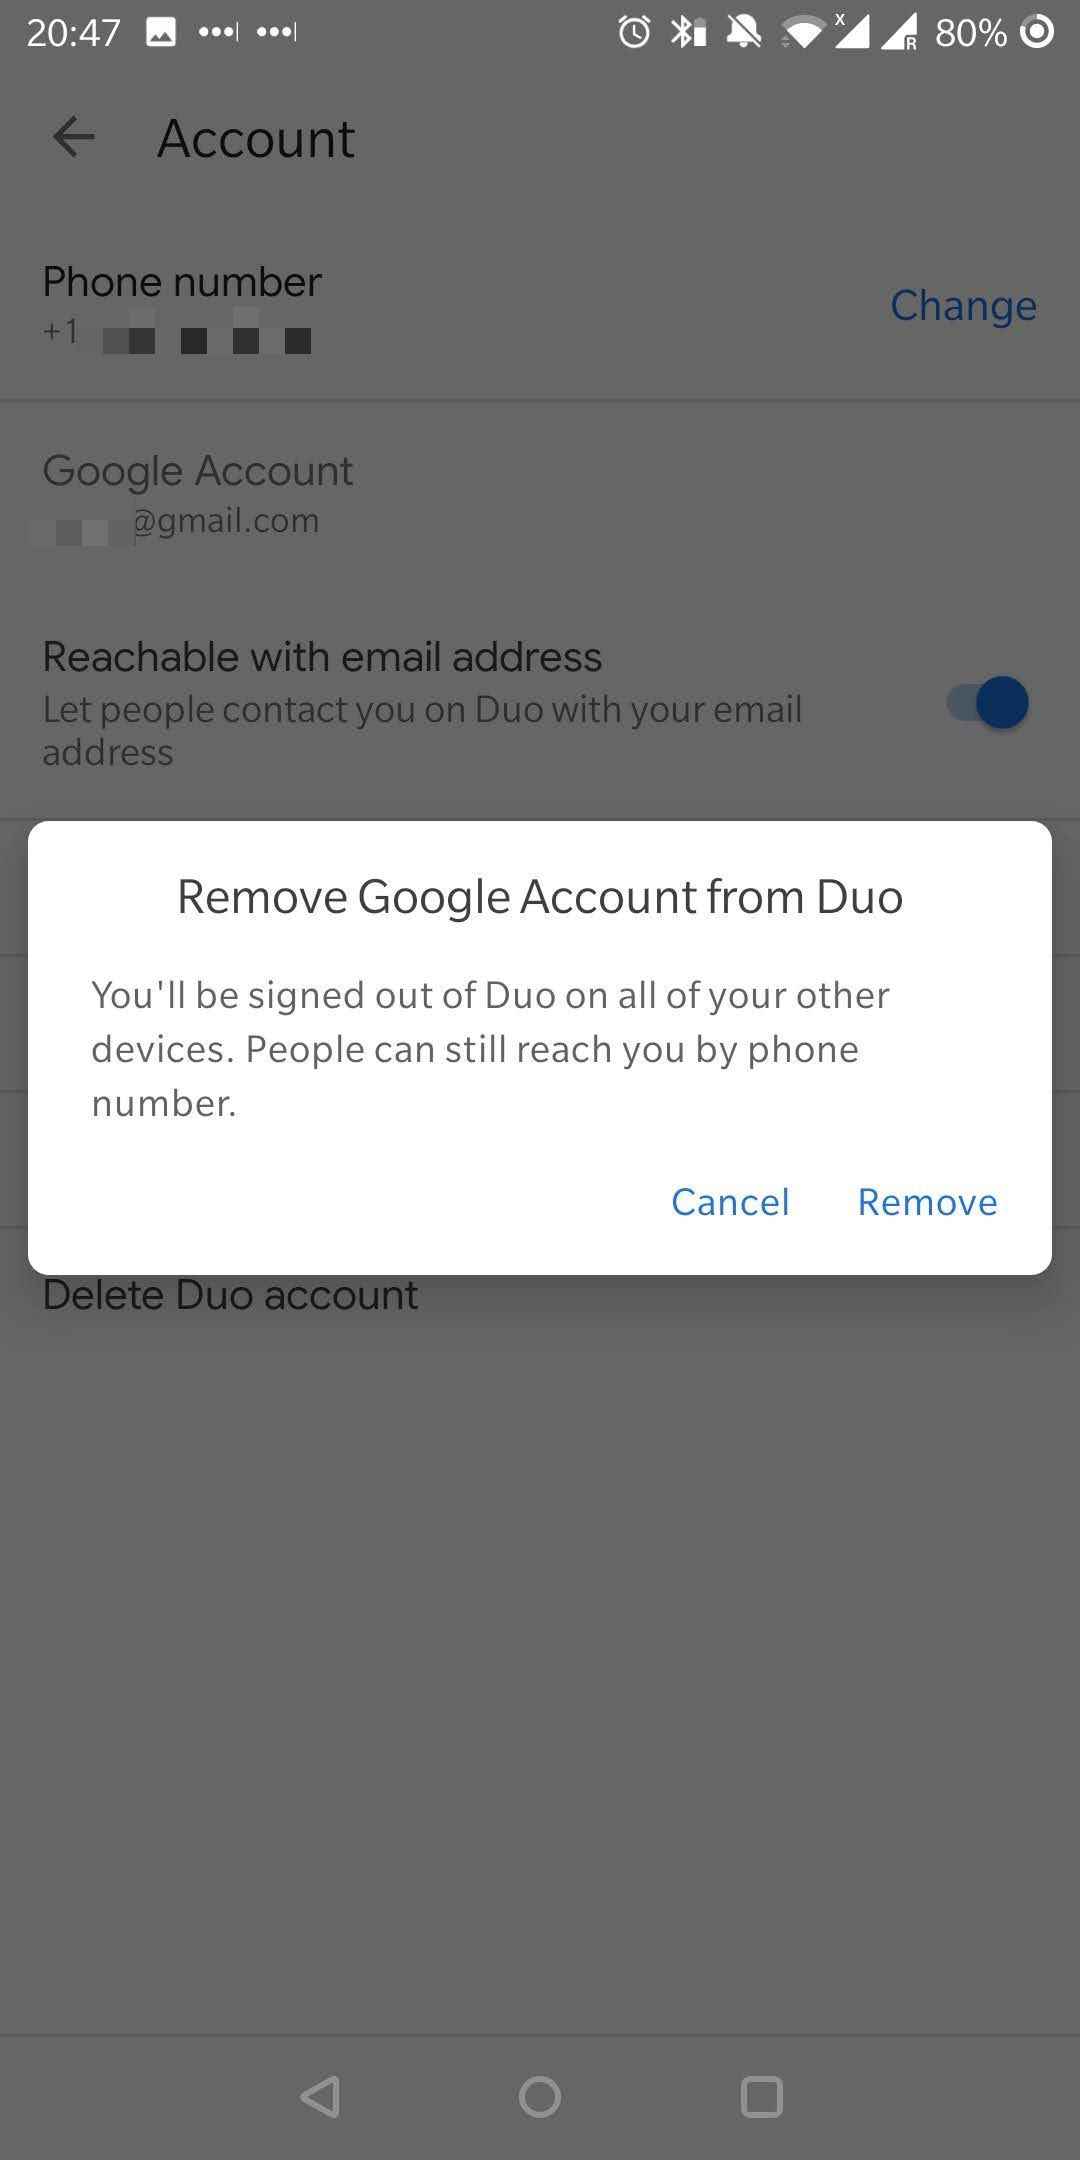 Remove Google Account from Duo